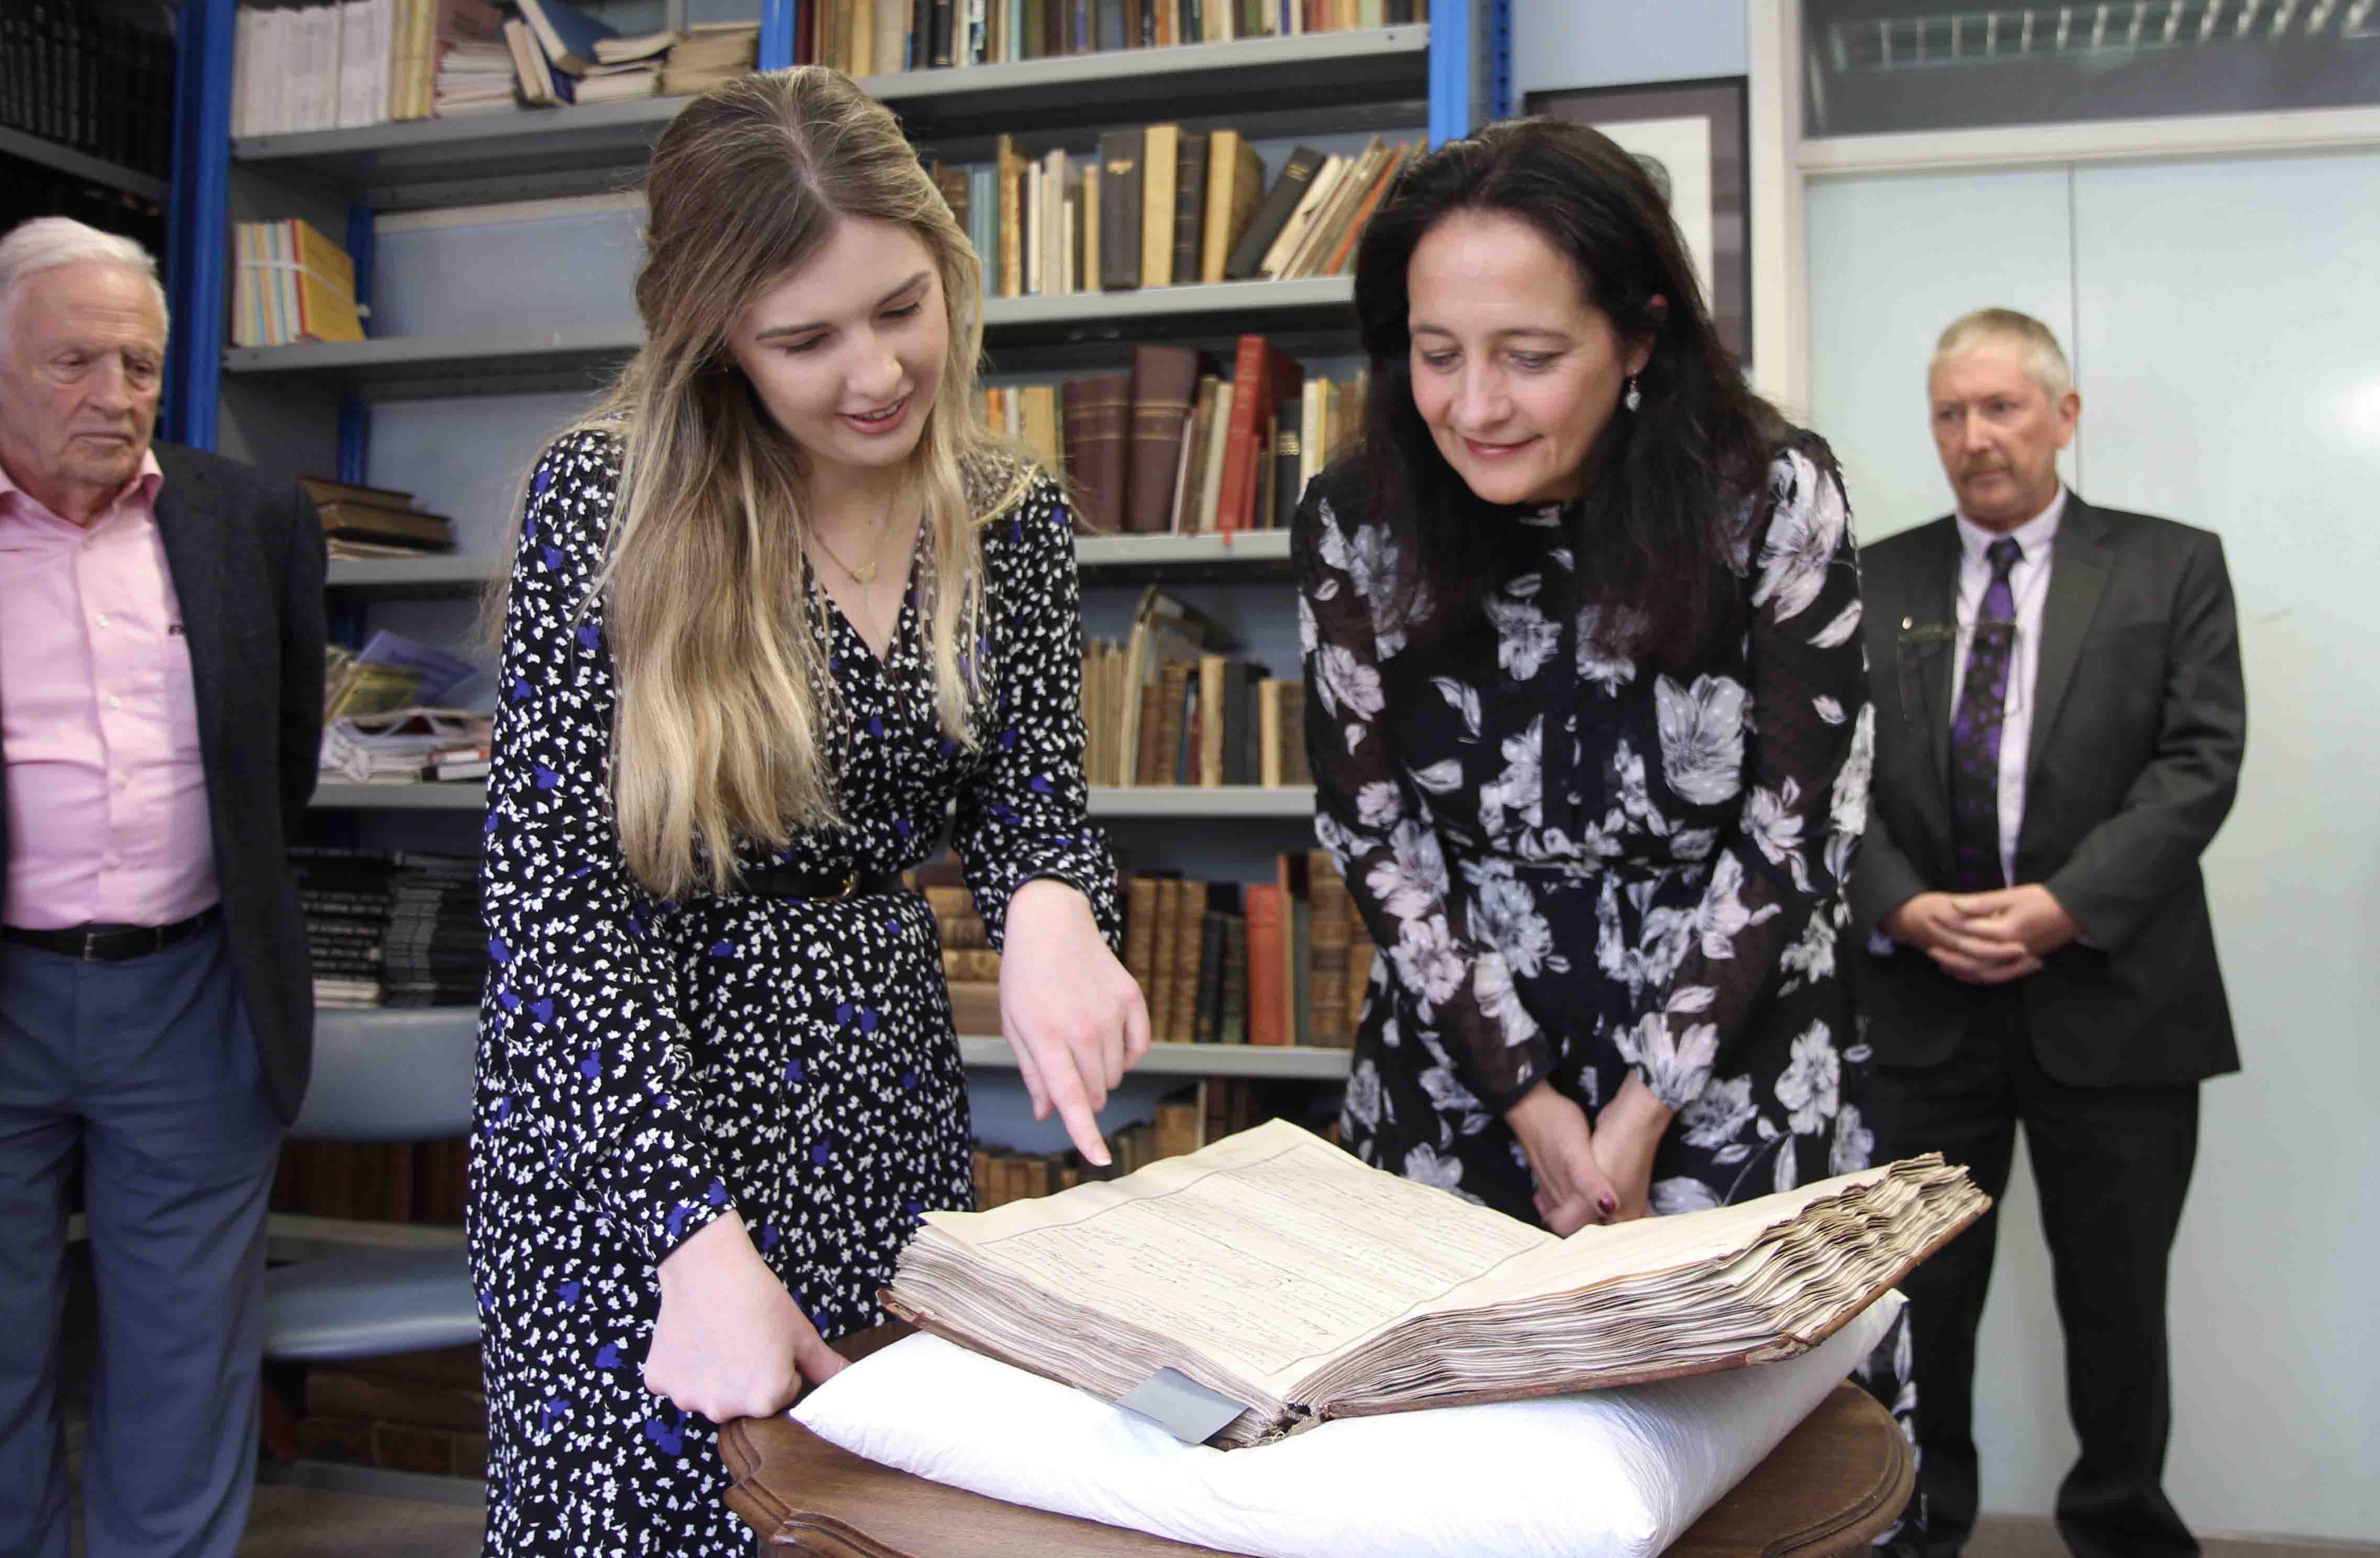 Assistant Archivist Aisling Irwin explains her role to Minister Catherine Martin.